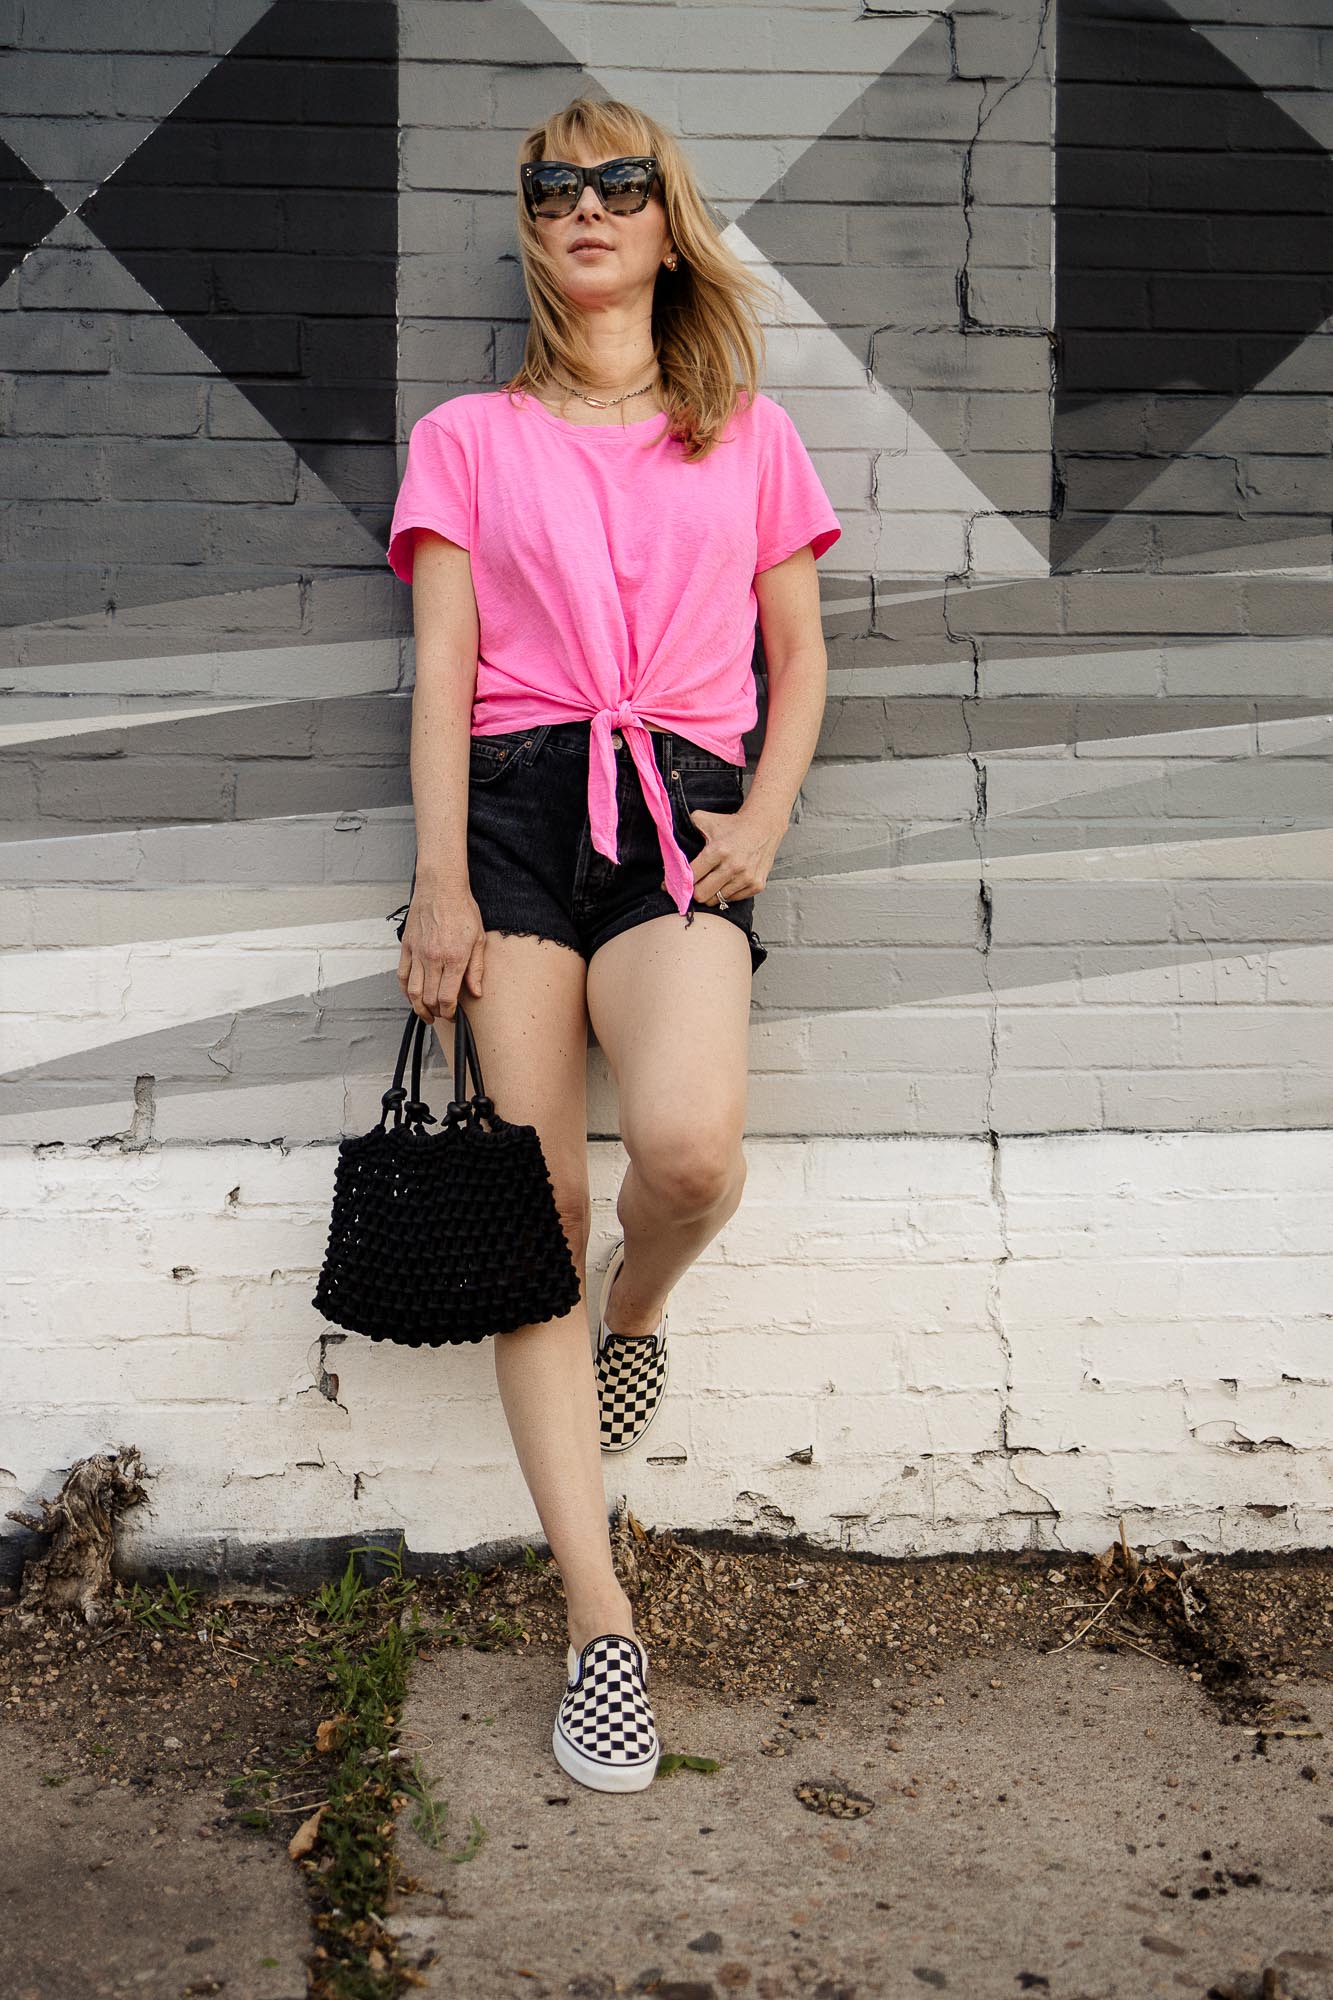 Wearing a hot pink Sundry tee and washed black shorts in front of a black and white mural.